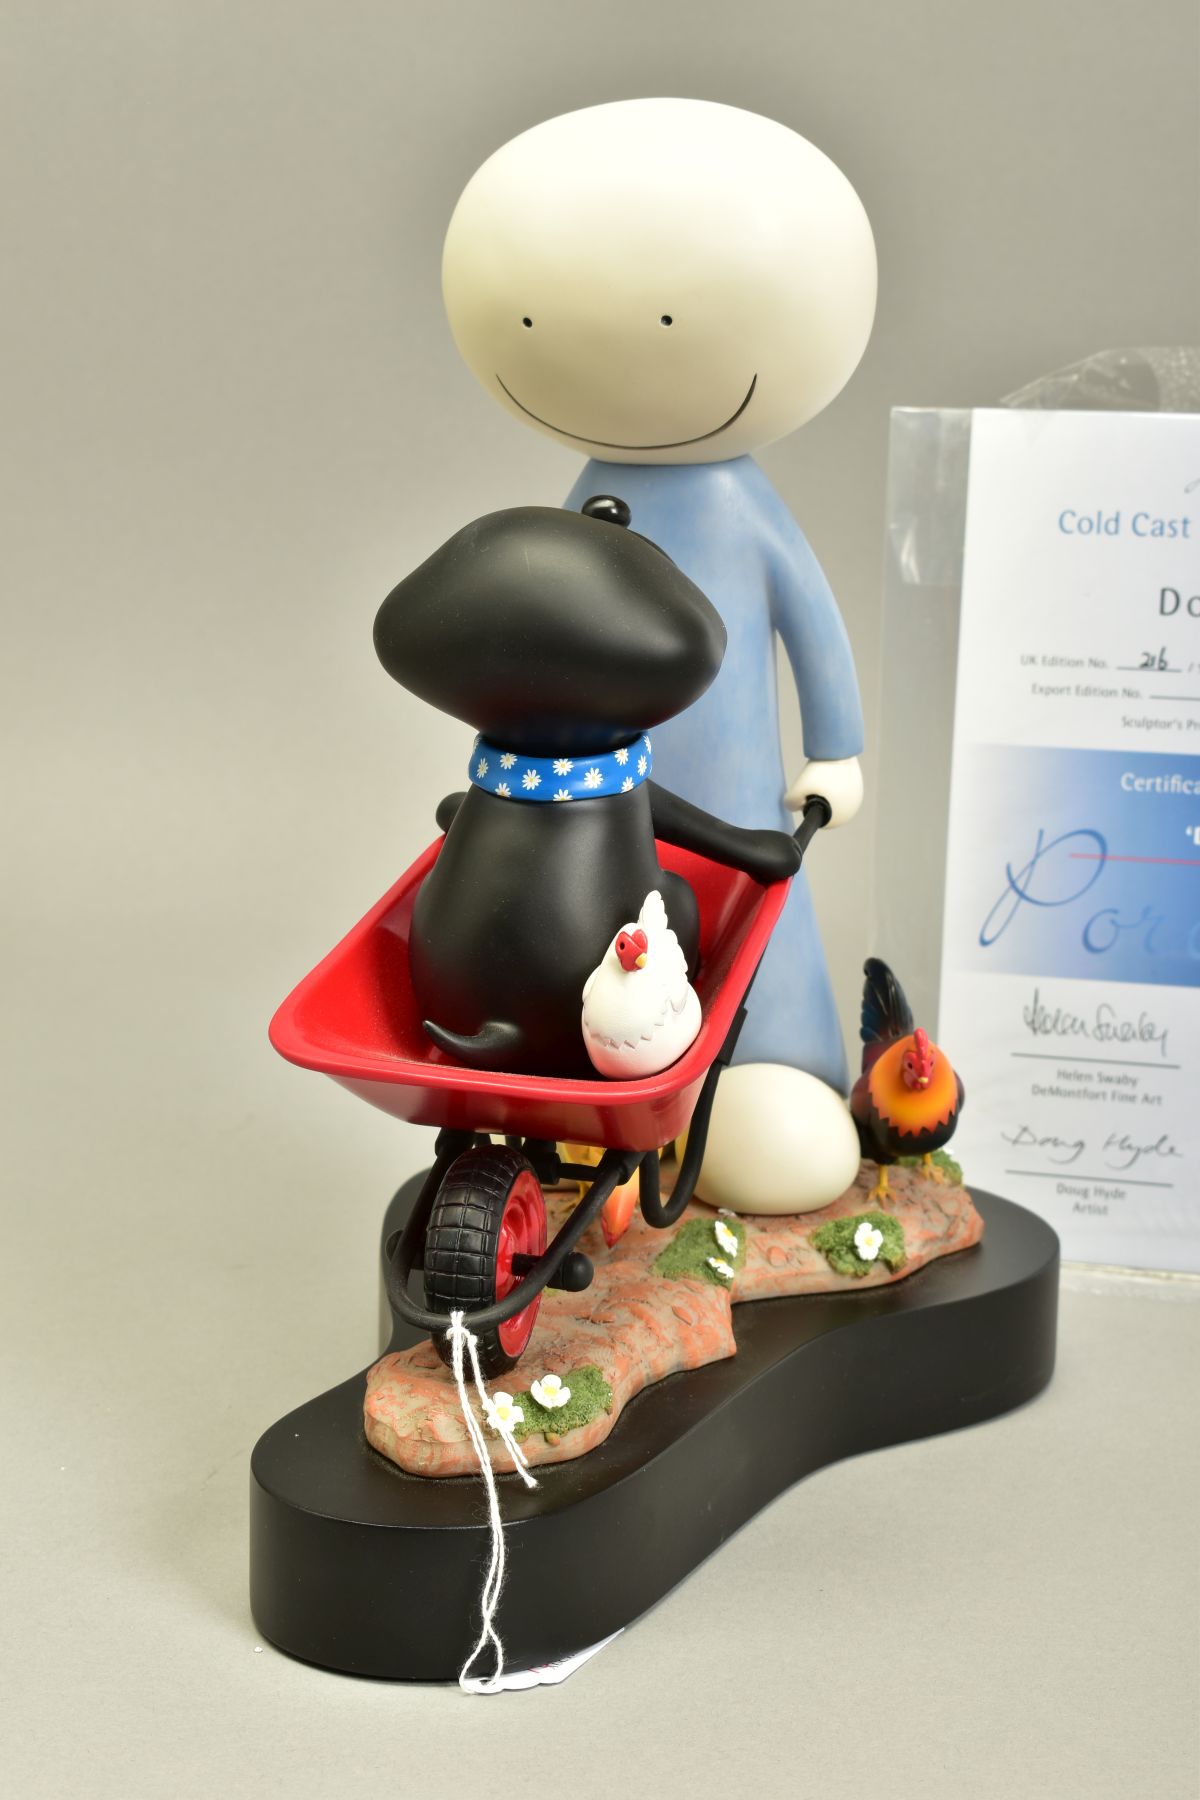 DOUG HYDE (BRITISH 1972) 'DAISY TRAIL', a limited edition cold cast porcelain sculpture of a boy - Image 2 of 5